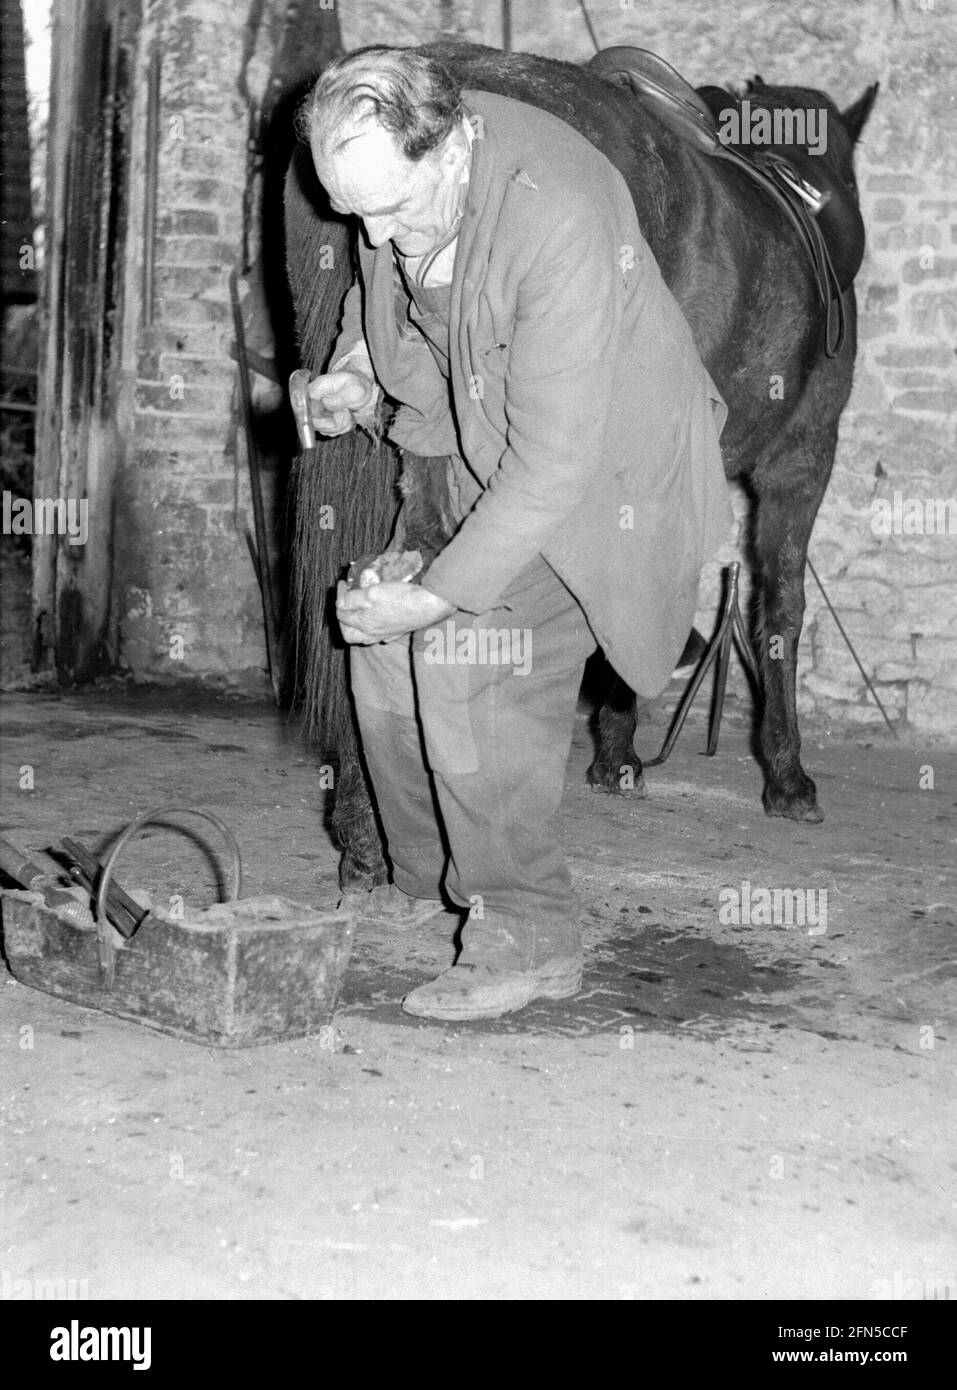 A blacksmith or farrier hammers nails into a shoe on the rear hoof of a black horse in the 1950s Stock Photo